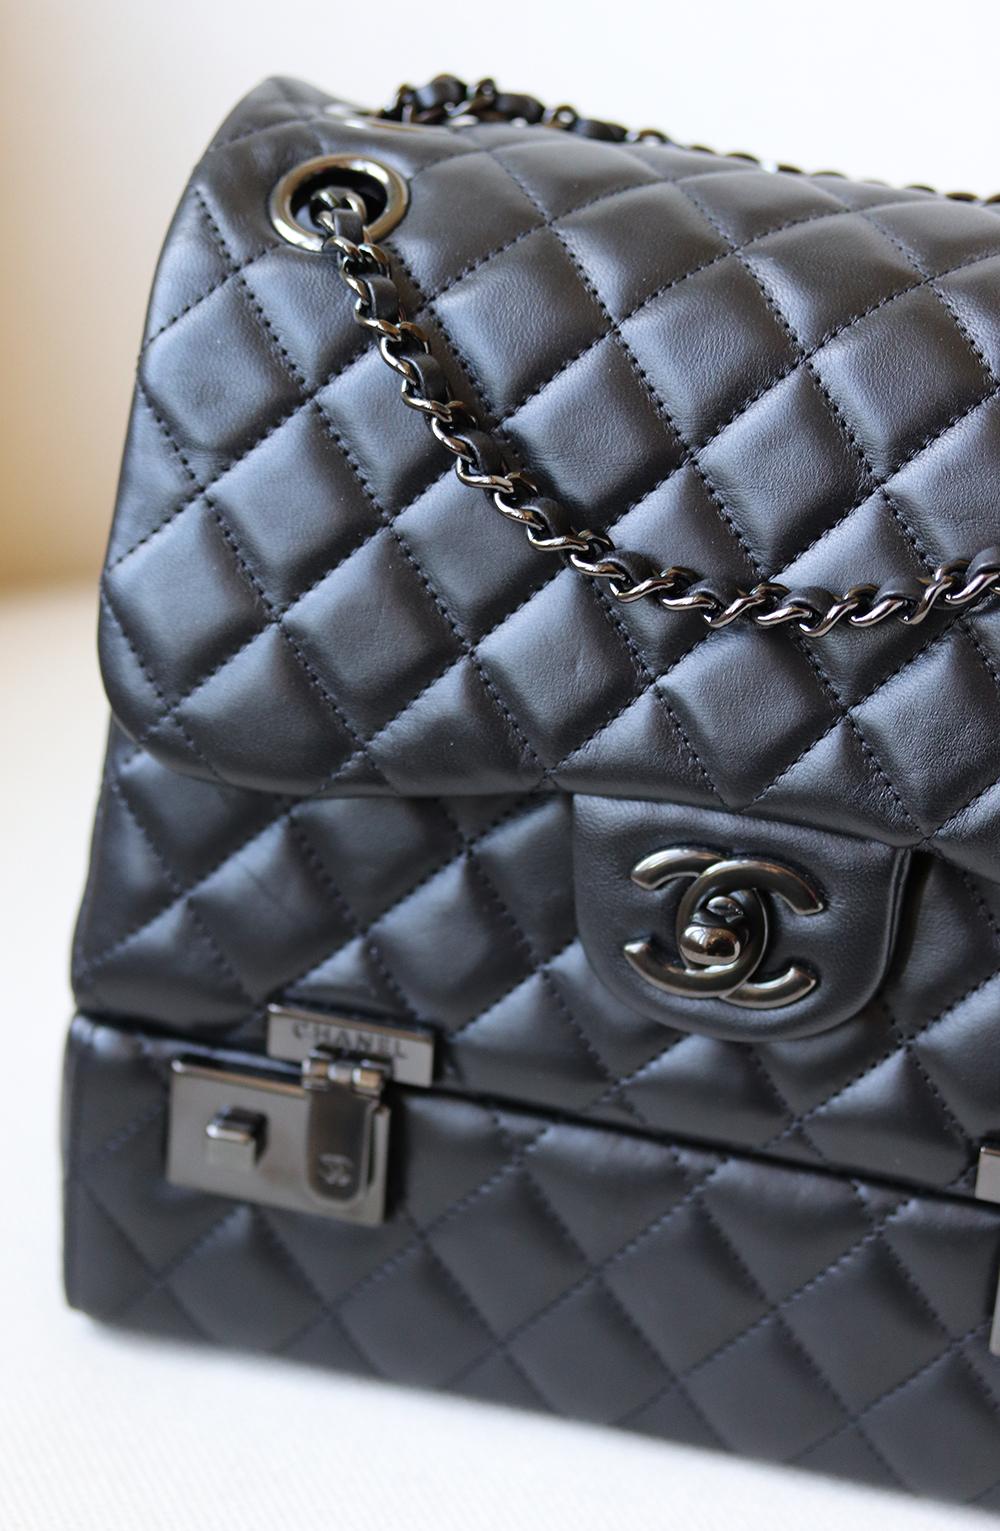 Chanel Classic Quilted Lambskin Luggage Box Flap Bag has been hand-finished by skilled artisans in the label's workshop.
Boasting soft black quilted lambskin-leather exterior, this design is accented with black-toned and black lambskin-leather chain